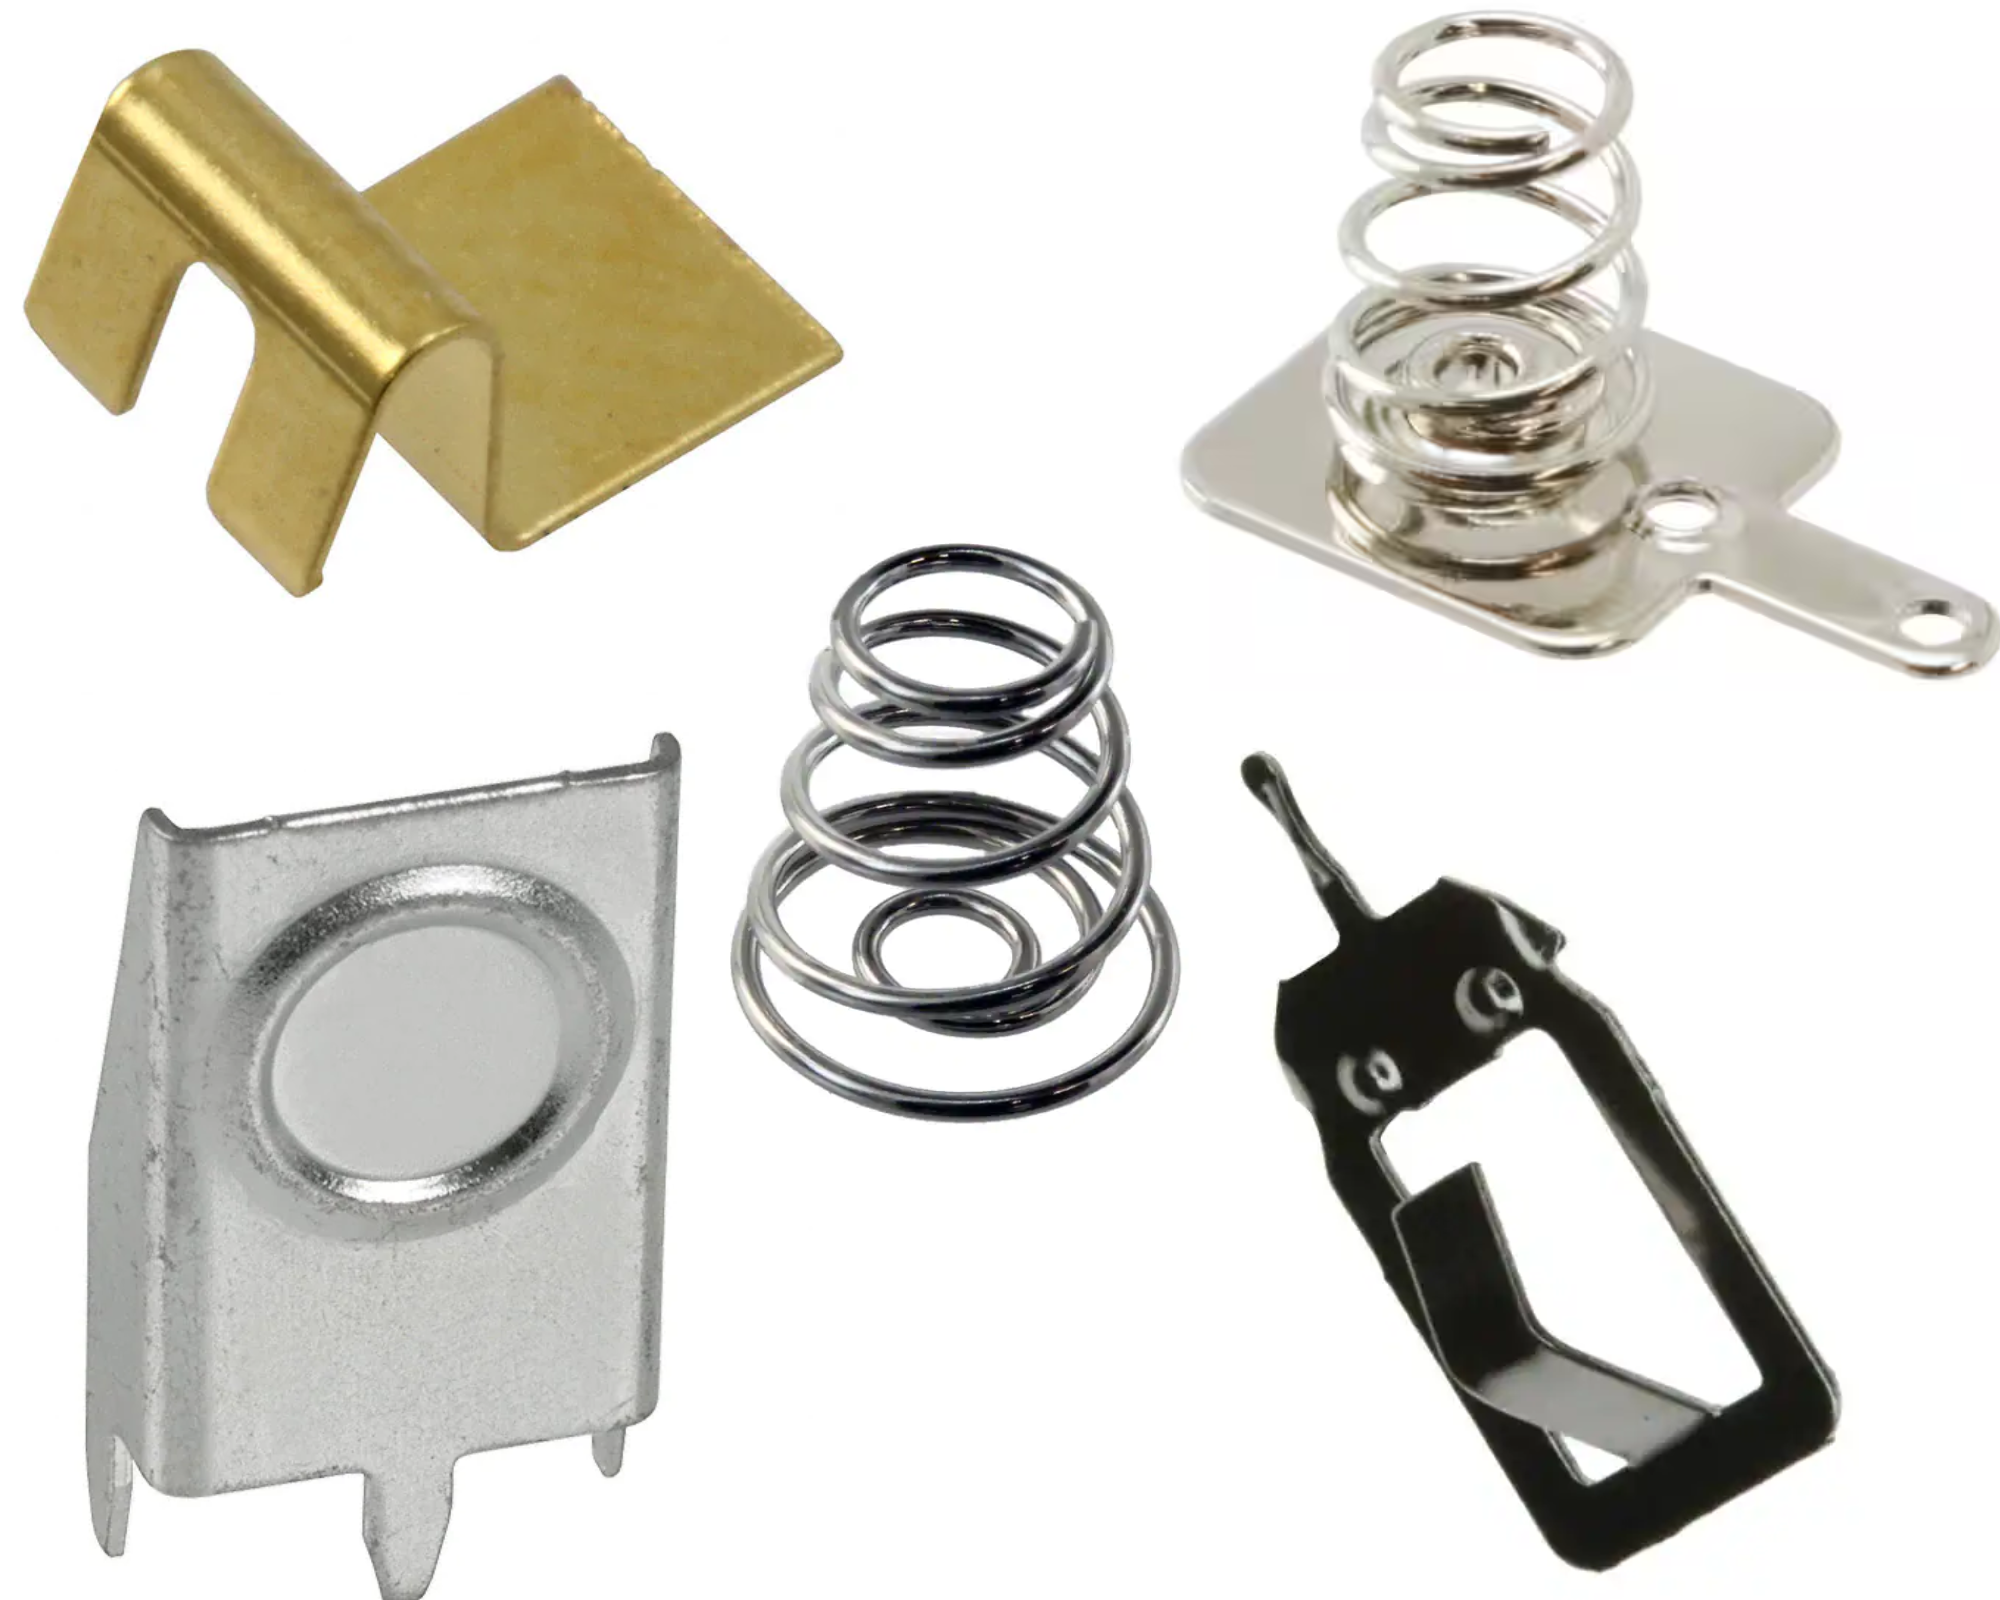 Battery Holders, Contacts, Clips